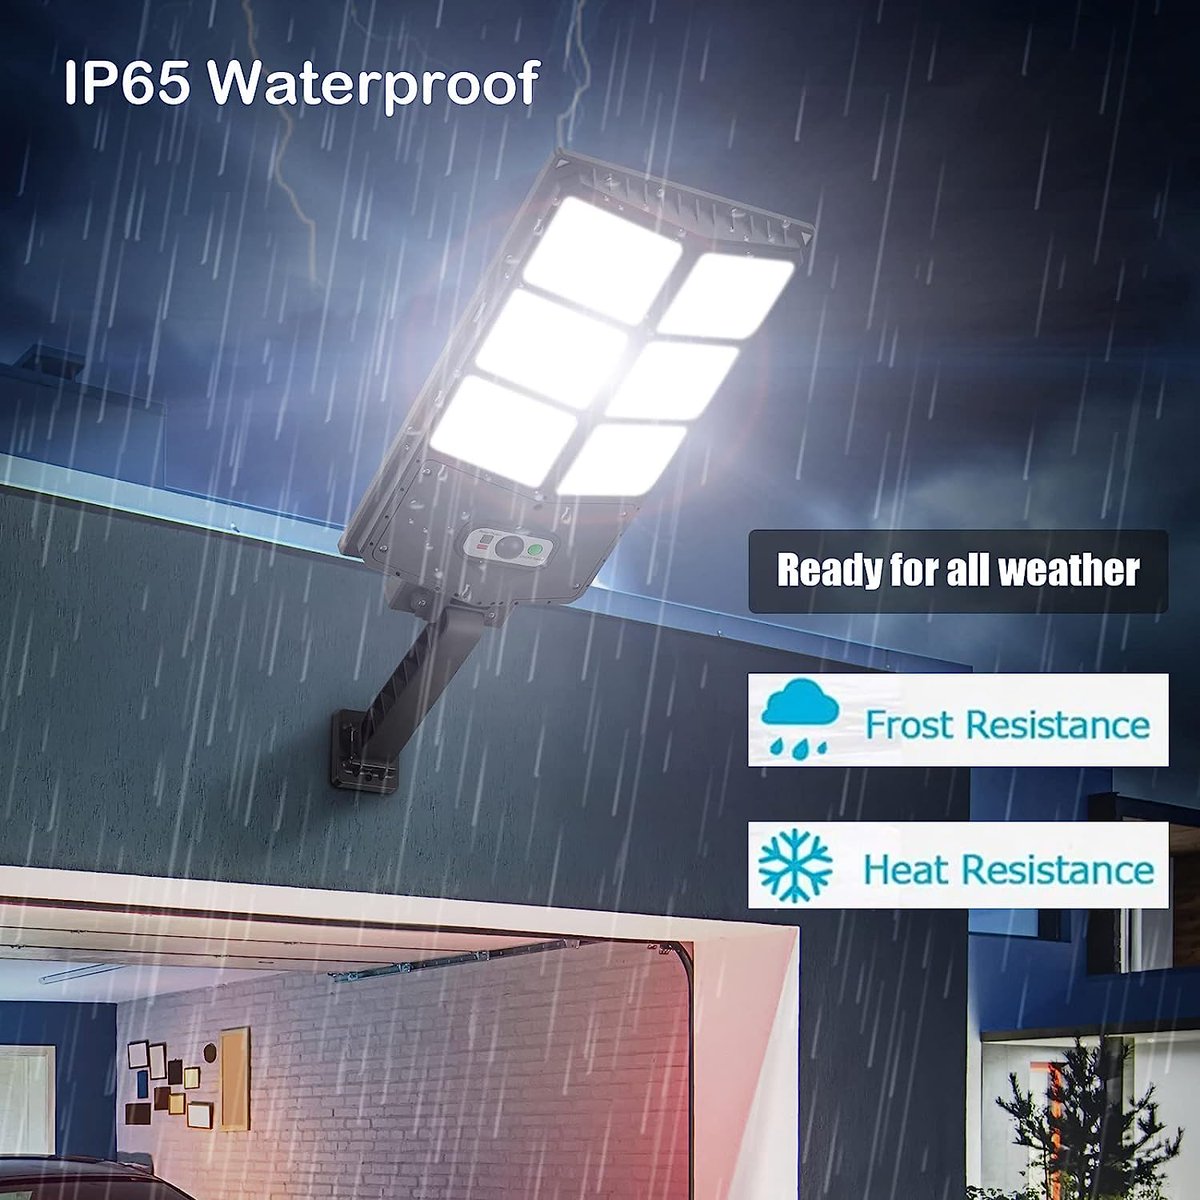 150W Solar Lights Outdoor, 3 Modes LED Solar Wall Light Motion Sensor with Remote Control, 8000LM IP66 Waterproof Solar Light Lamp for Garden Yard, Driveway, Parking Lot
The offer :$US34.98  😍
  #Titanic #GoodNight #GoodFriday 
BUY FROM AMAZON: